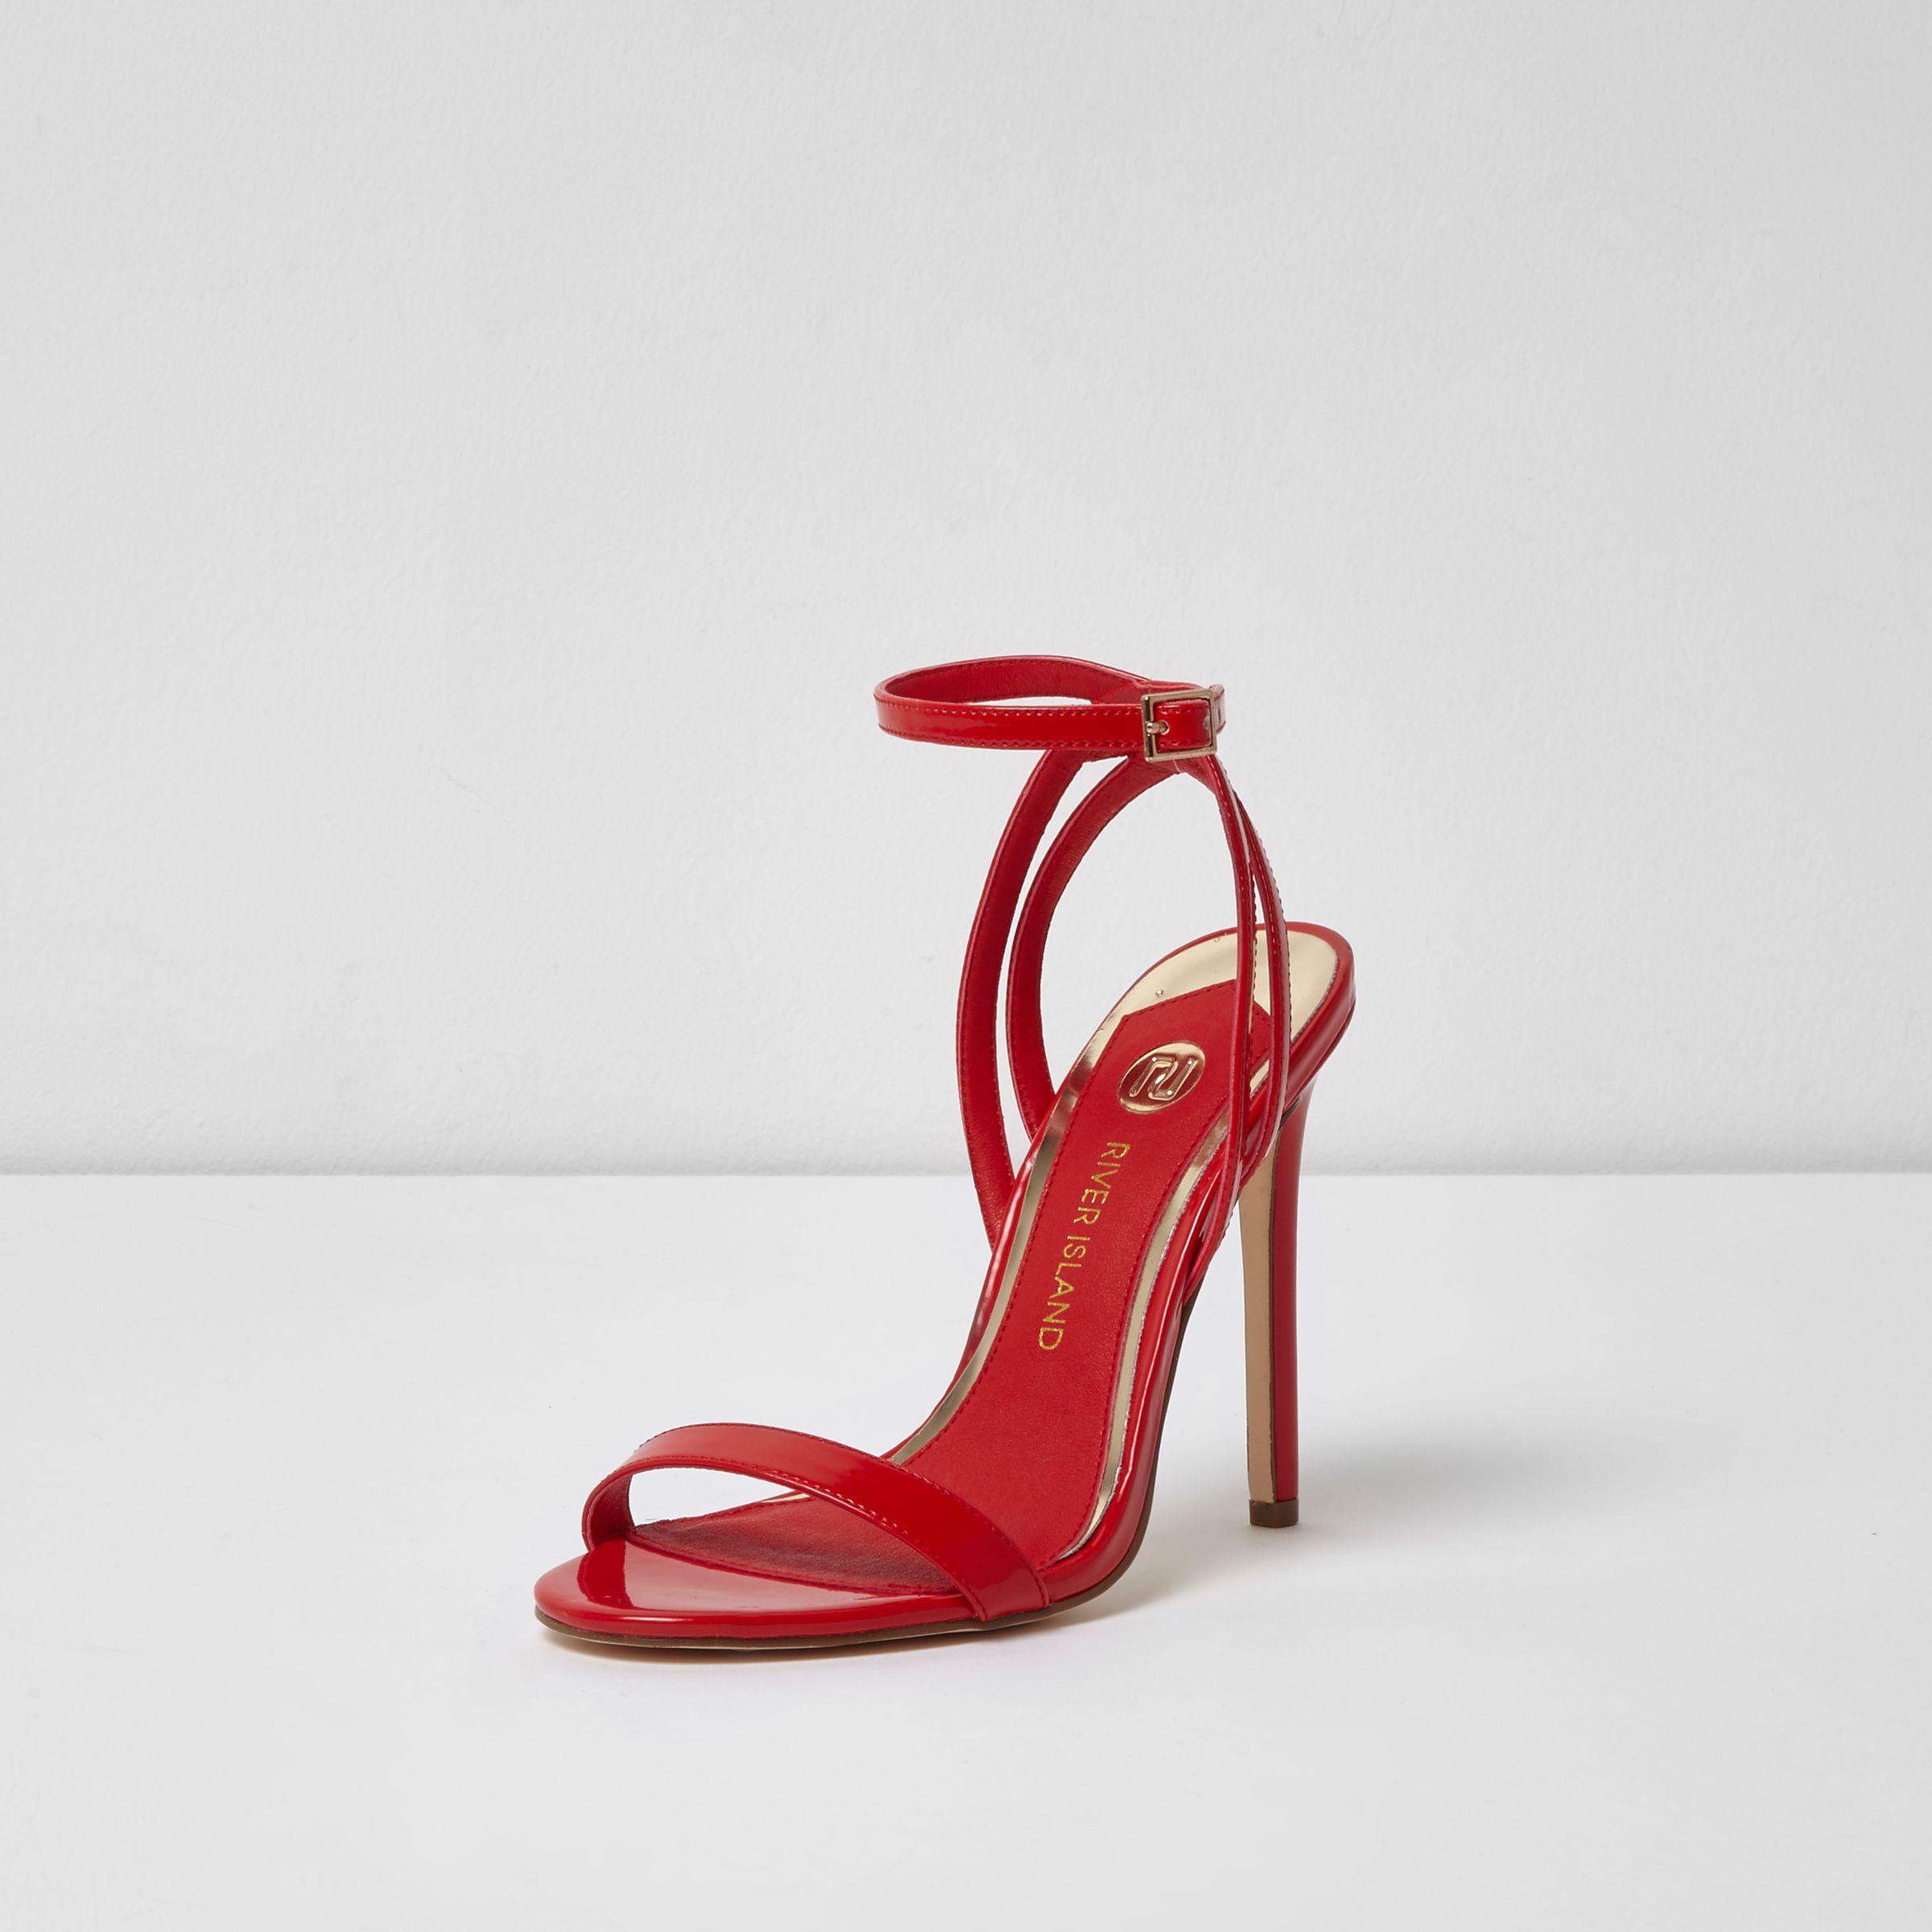 River Island Red Patent Barely There Sandals - Lyst